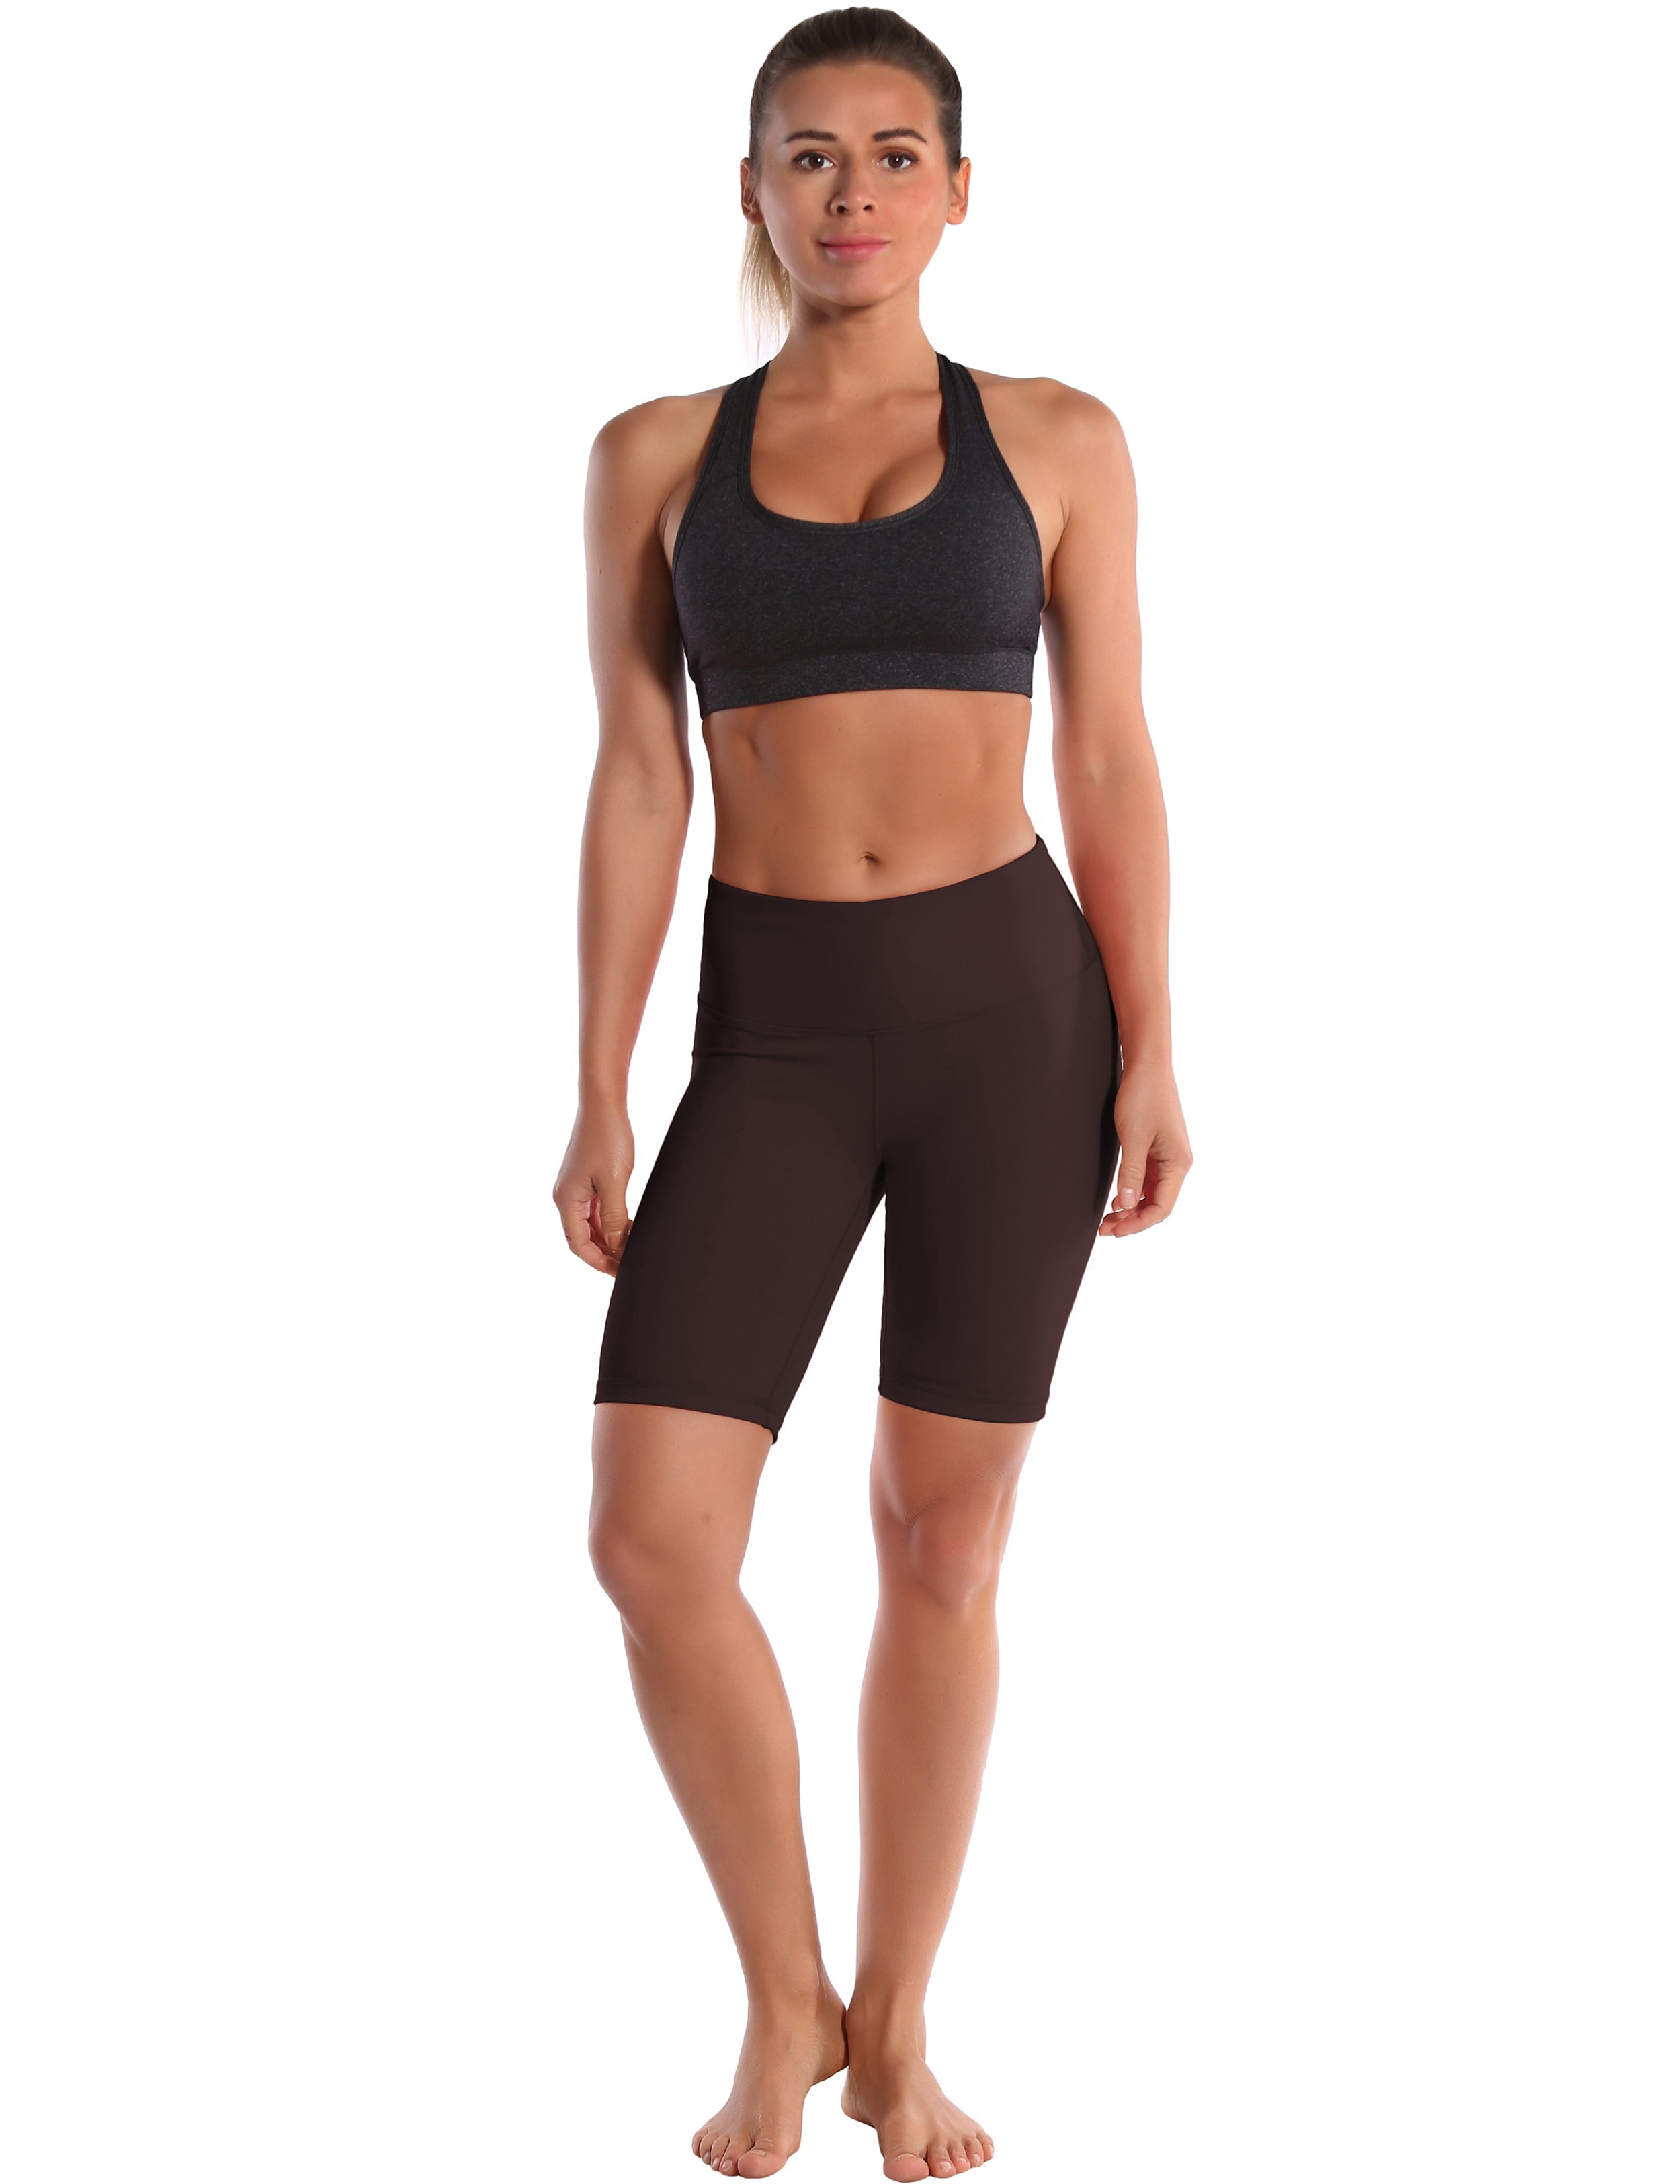 8" High Waist Yoga Shorts mahoganymaroon Sleek, soft, smooth and totally comfortable: our newest style is here. Softest-ever fabric High elasticity High density 4-way stretch Fabric doesn't attract lint easily No see-through Moisture-wicking Machine wash 75% Nylon, 25% Spandex